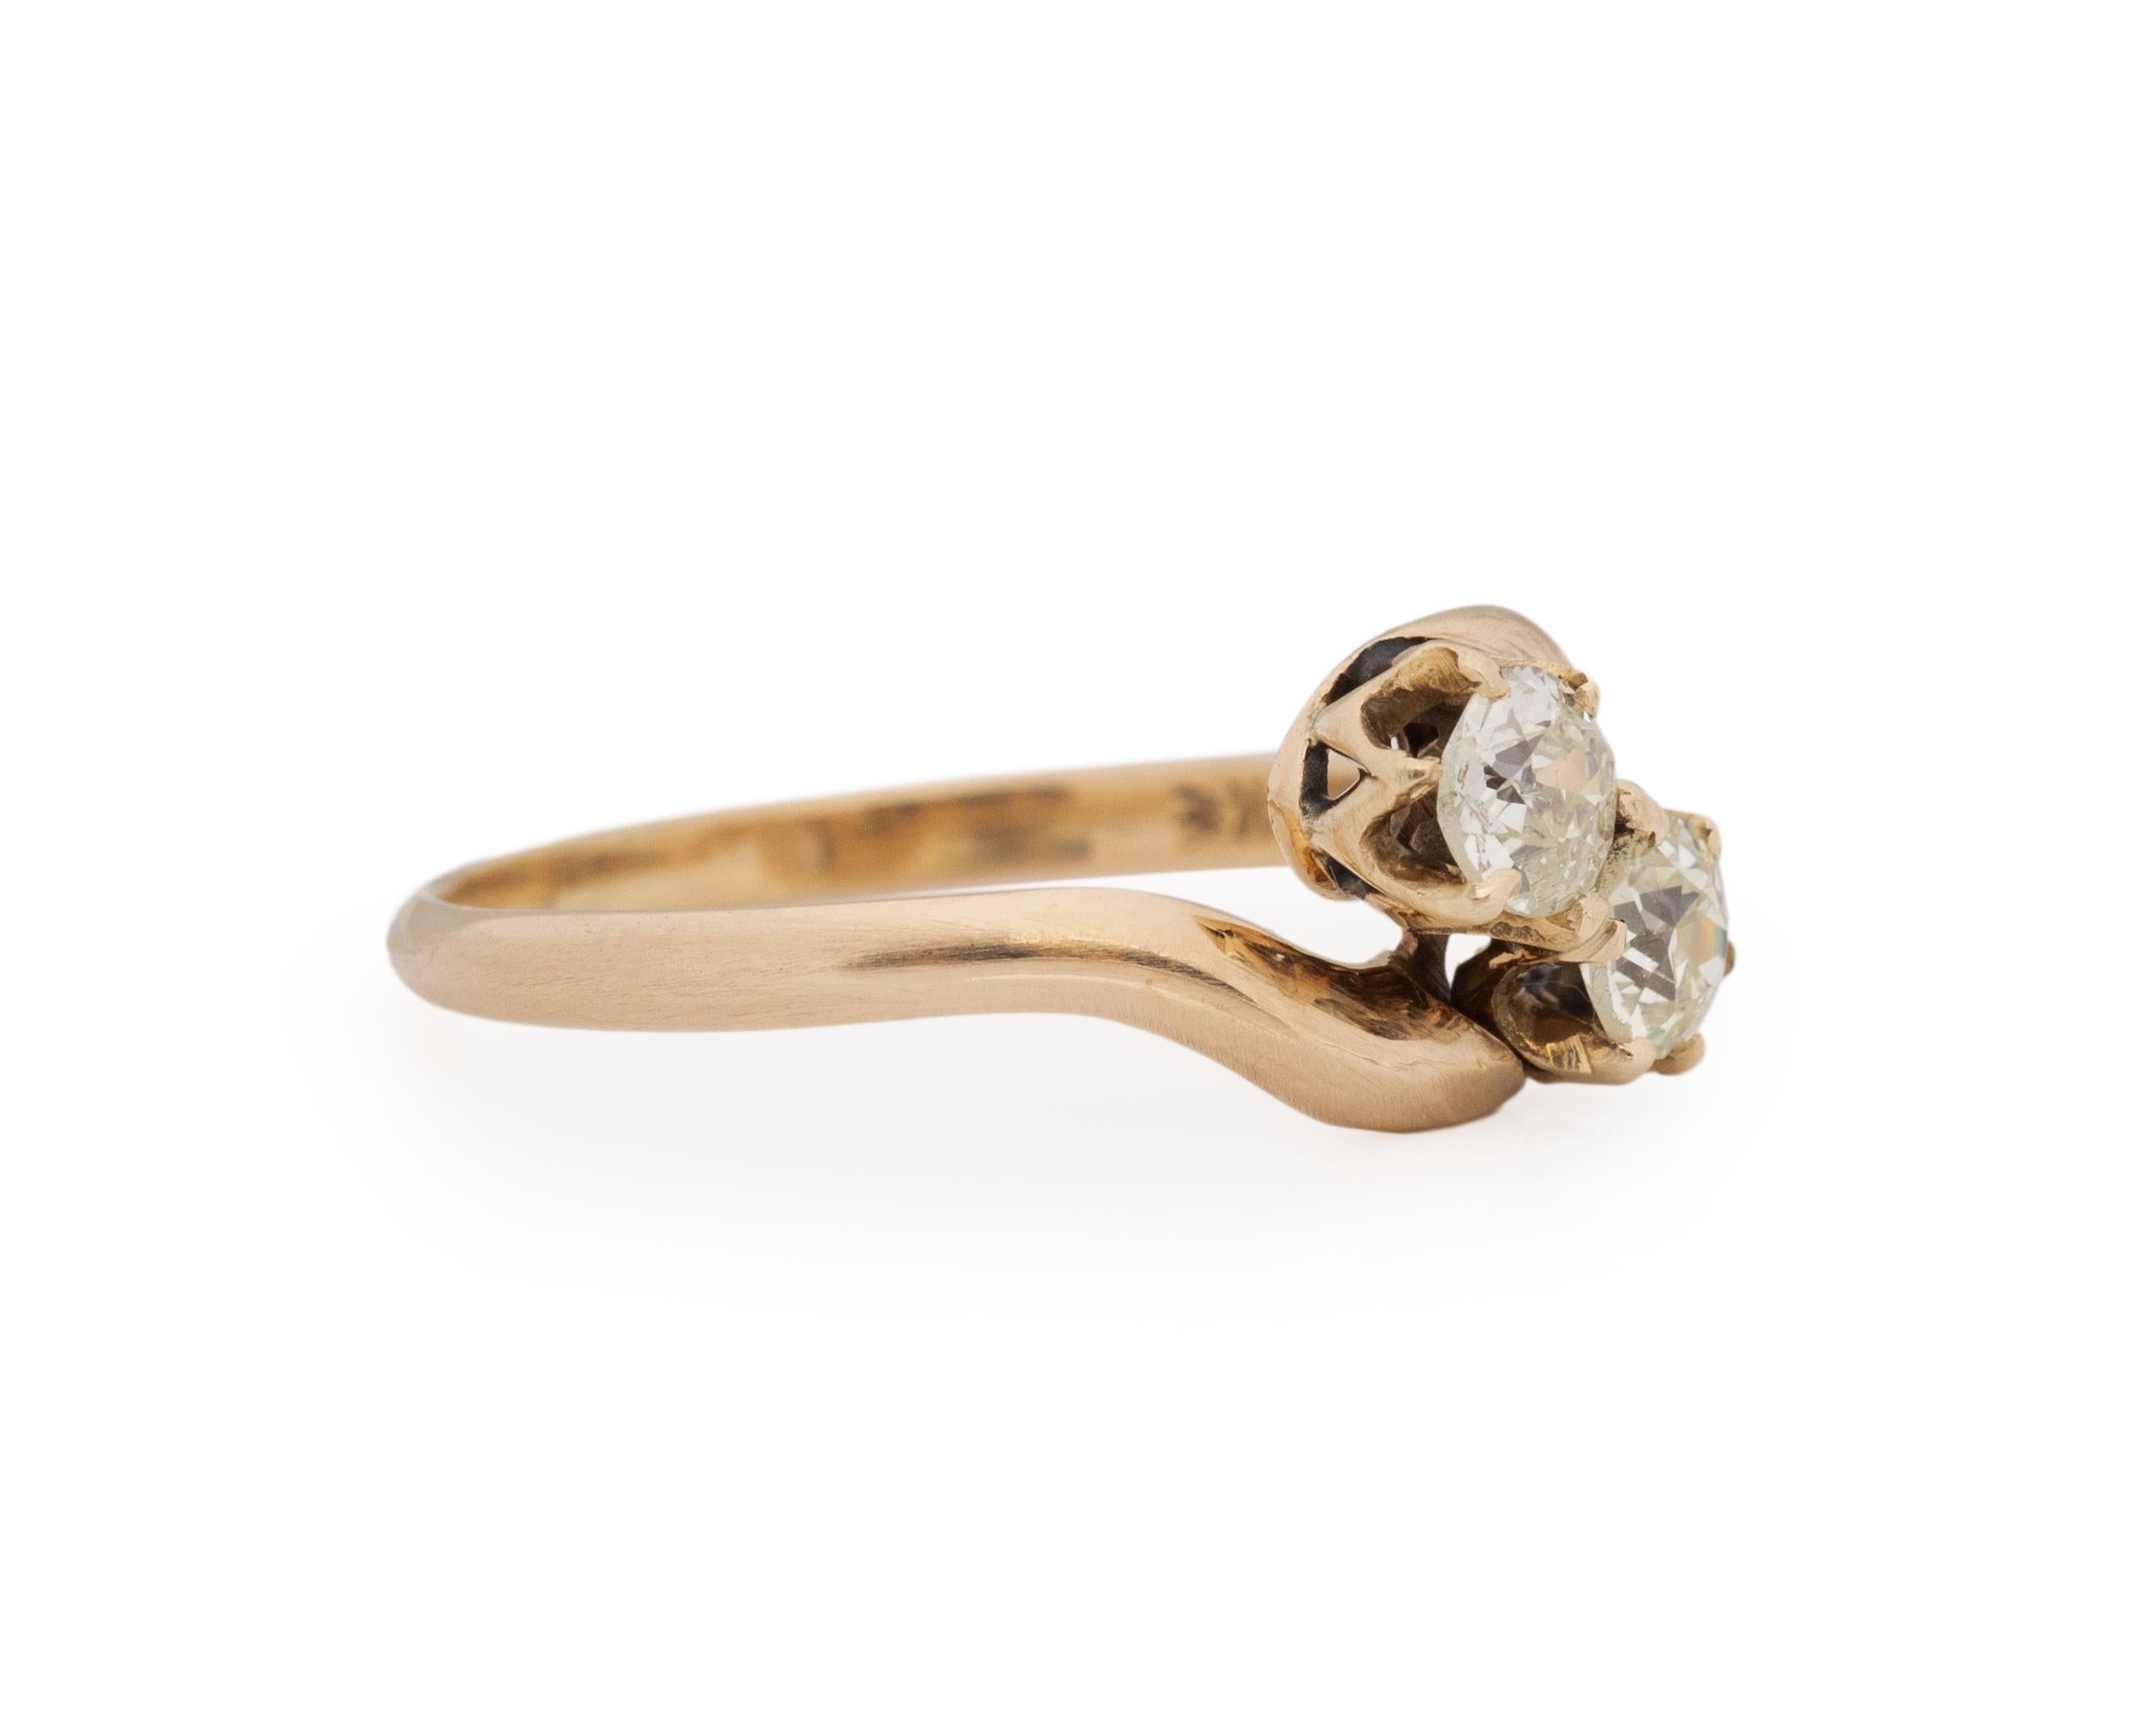 Ring Size: 8.75
Metal Type: 14k Yellow Gold [Hallmarked, and Tested]
Weight: 2.0 grams

Diamond Details:
GIA REPORT #:
Weight: .60ct, total weight
Cut: Old European brilliant
Color: J/K
Clarity: VS

Finger to Top of Stone Measurement: 5mm
Condition: